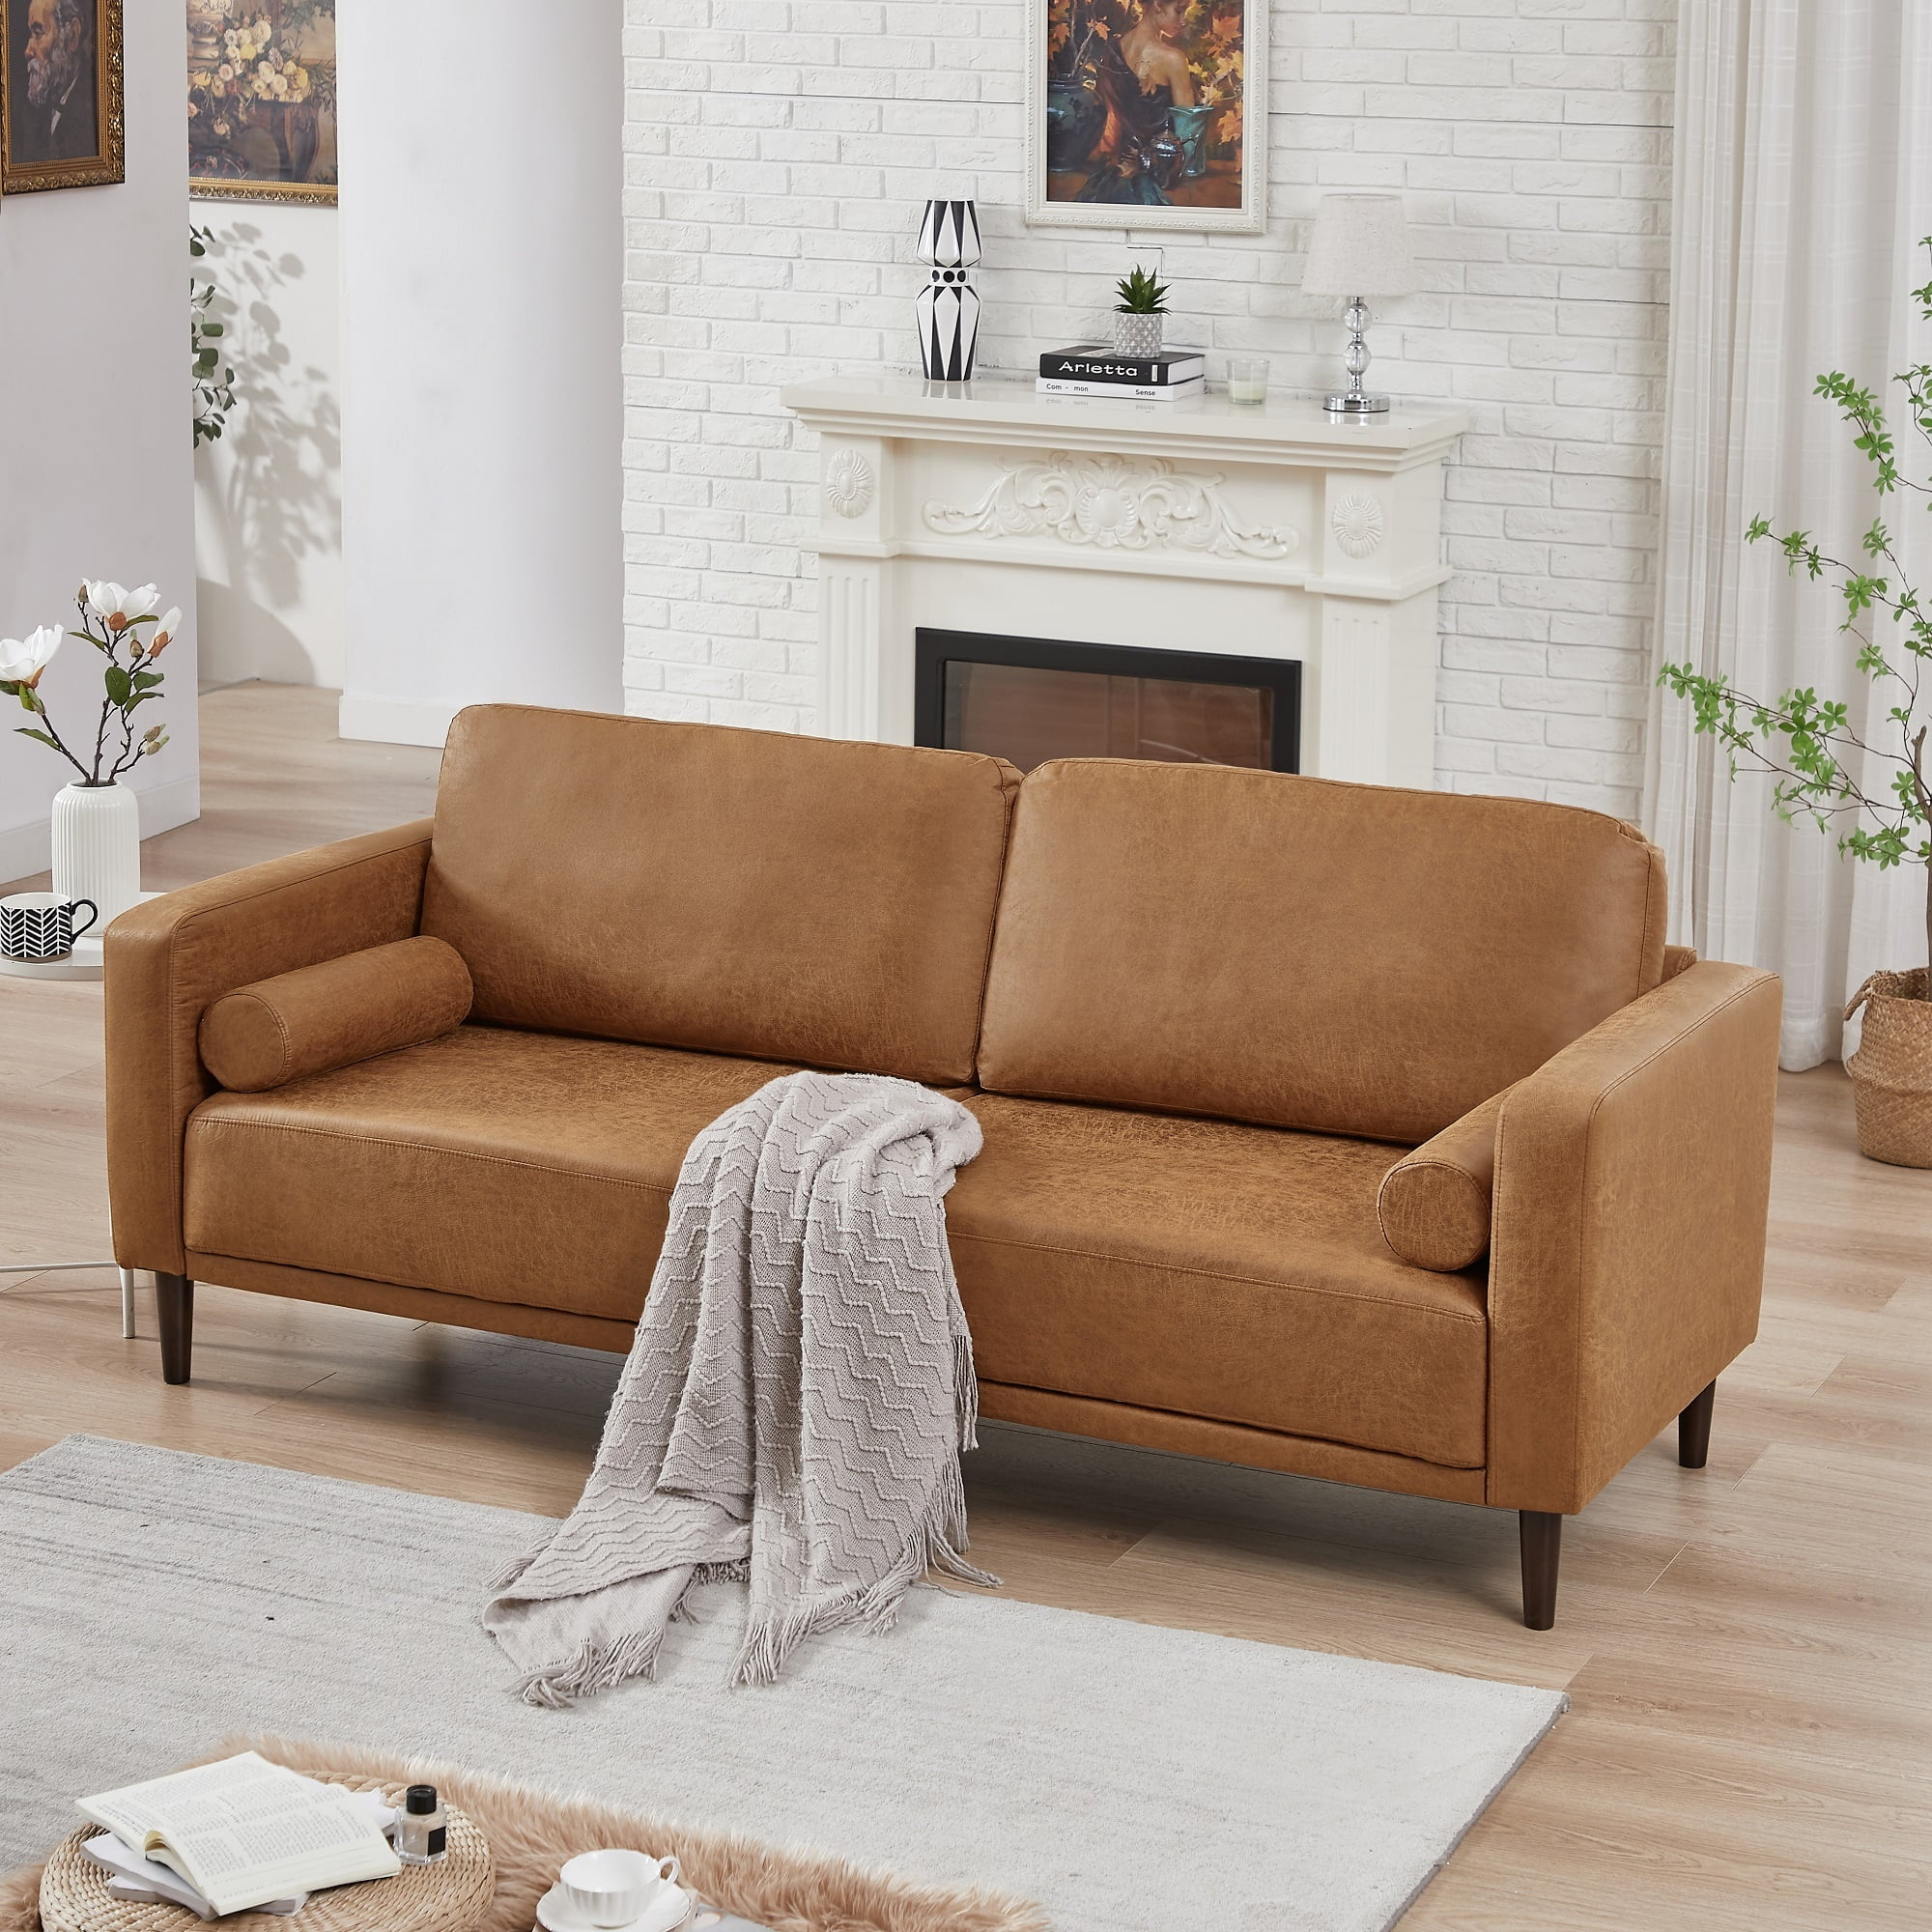 Homfa 3 Seat Sofa, 78.9\'\' Modern Large Upholstered PU Couch with Square  Arm, Camel